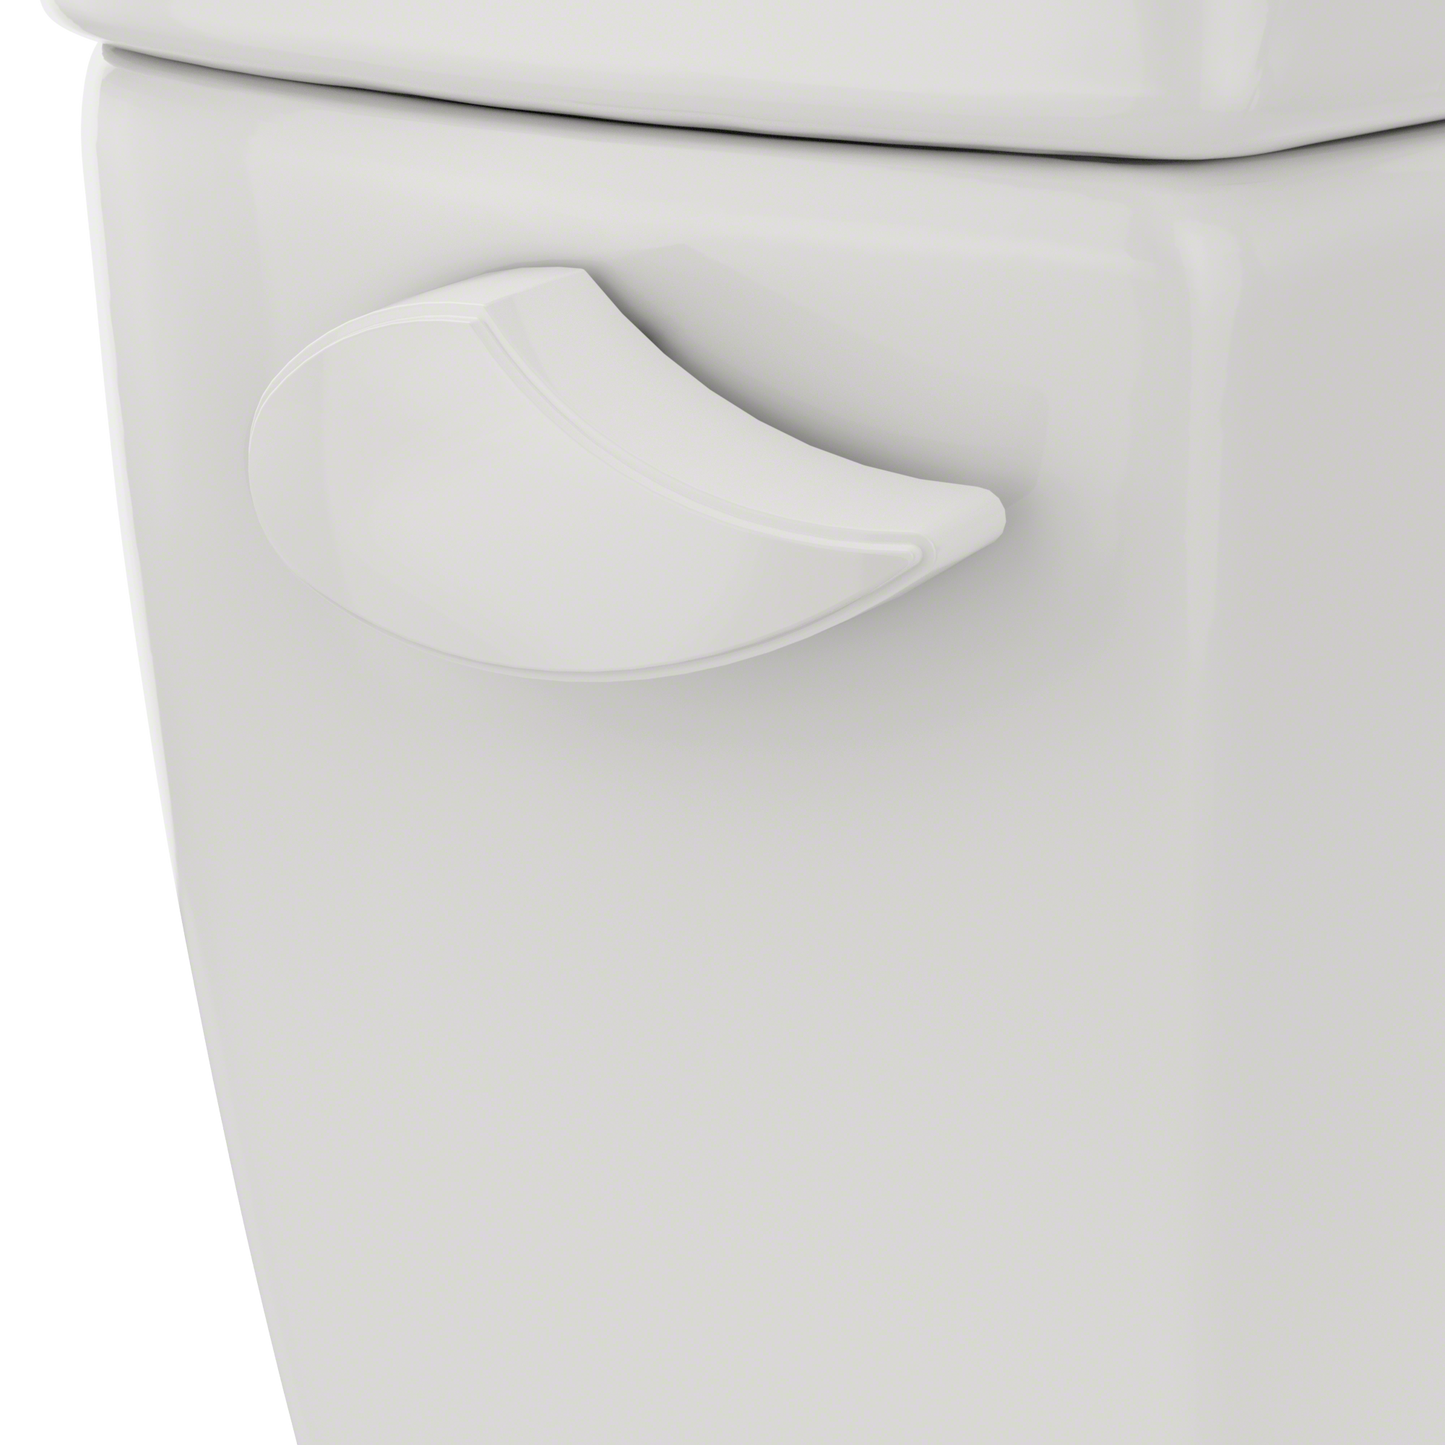 Toto THU068#11 - Trip Lever for ST743S Drake Toilet- Colonial White